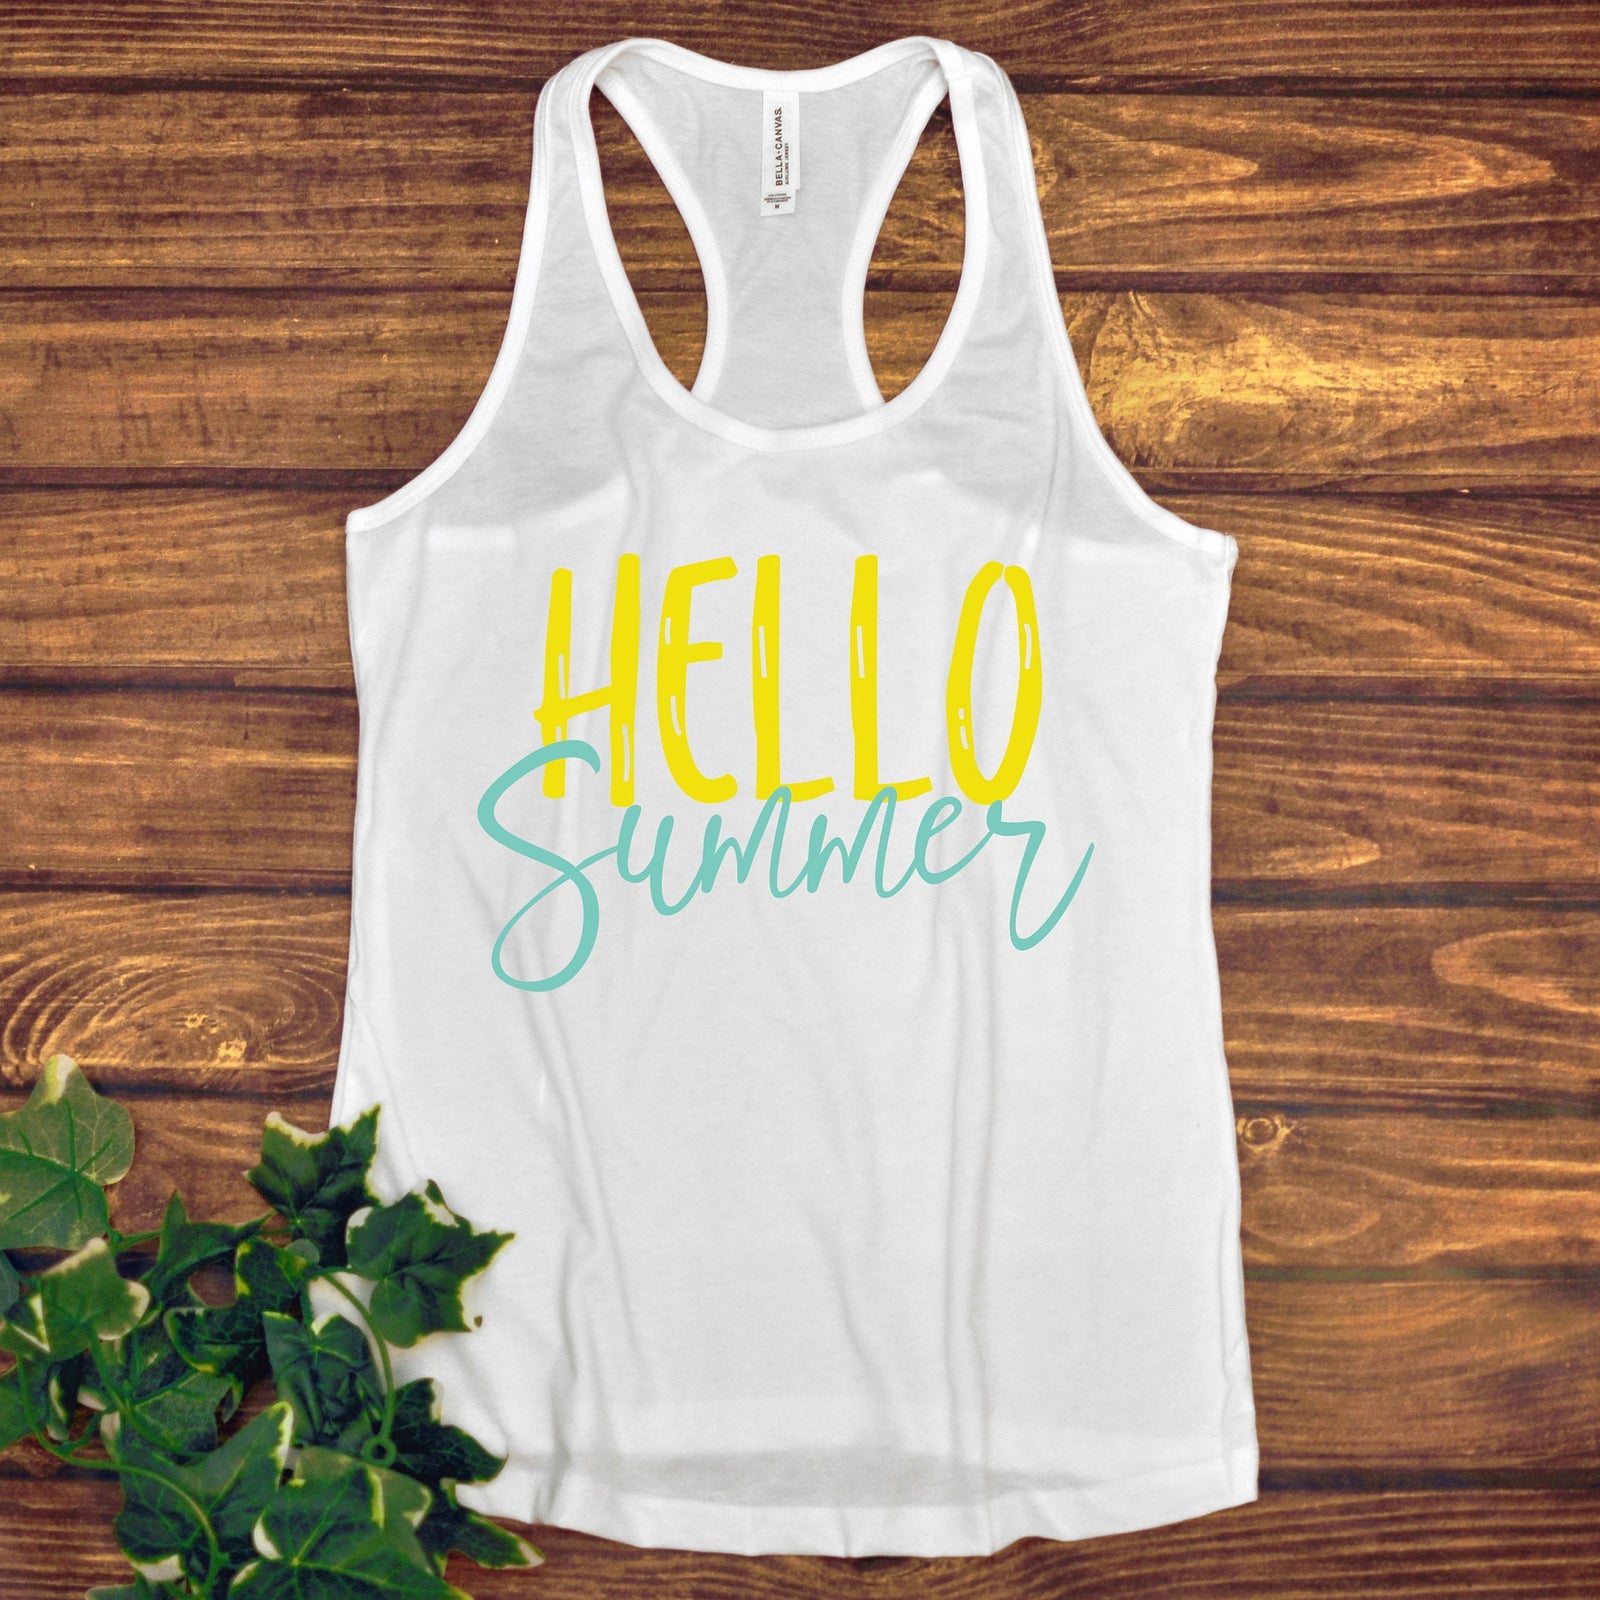 Hello Summer Ladies Tank Top - Beach Wear - Vacation - Family Matching Group Pictures - Summertime